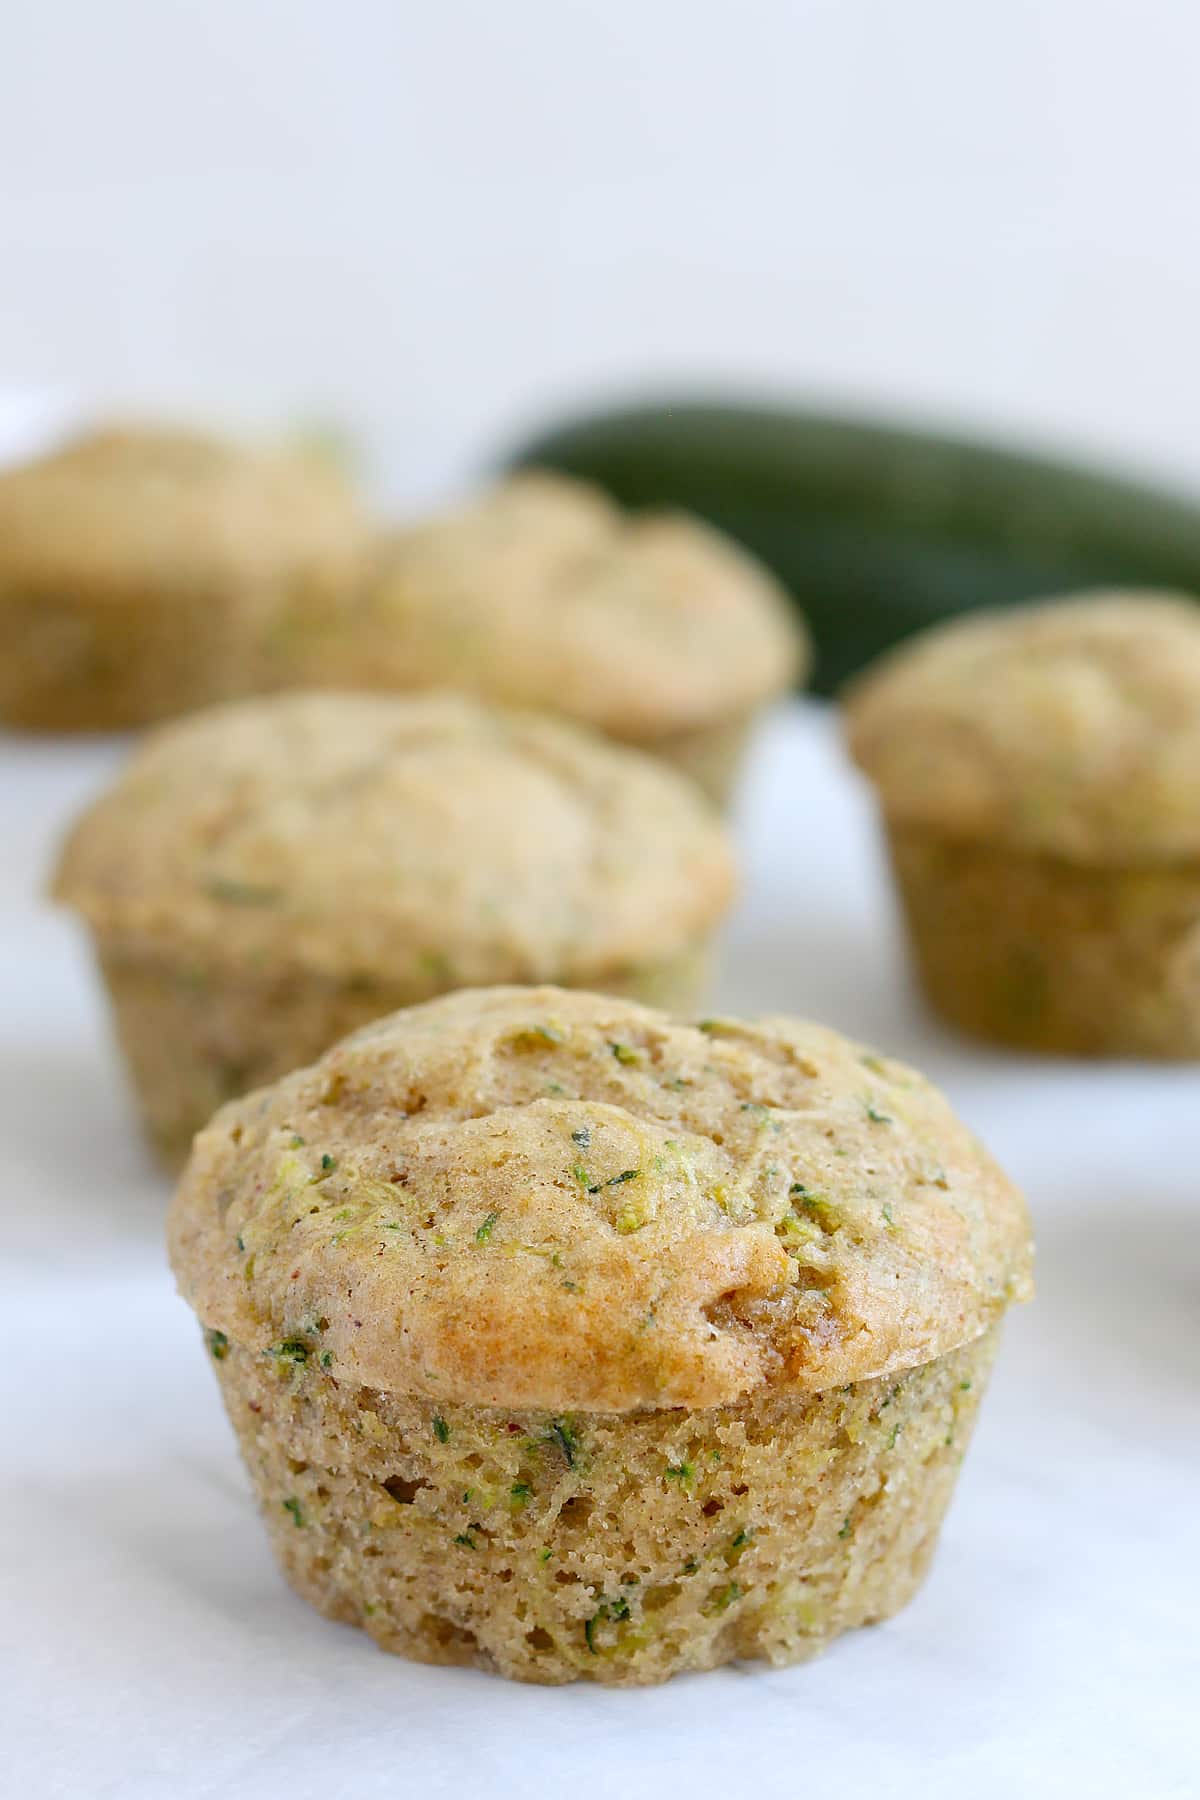 A zucchini muffin with a golden brown top, on a sheet of parchment paper.